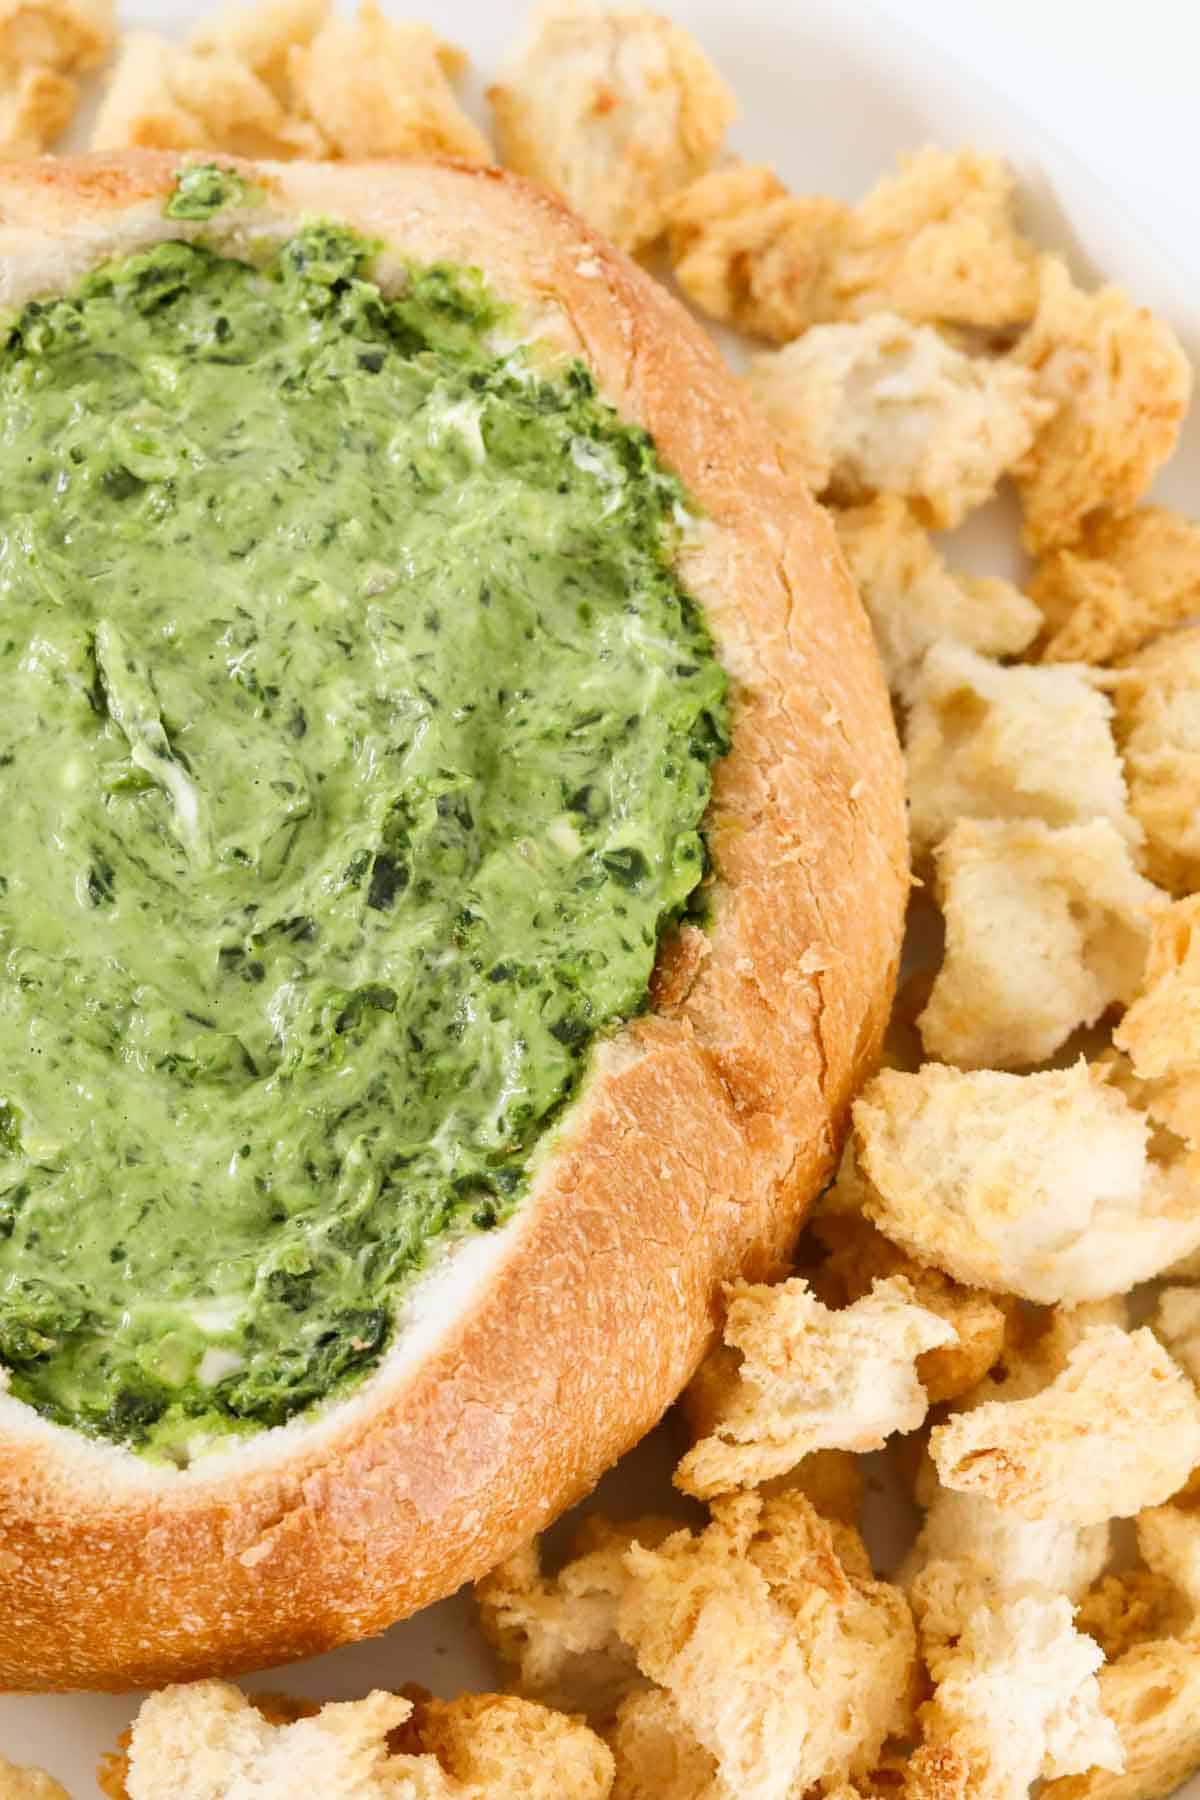 Green creamy dip inside a round bread loaf surrounded by pieces of bread.